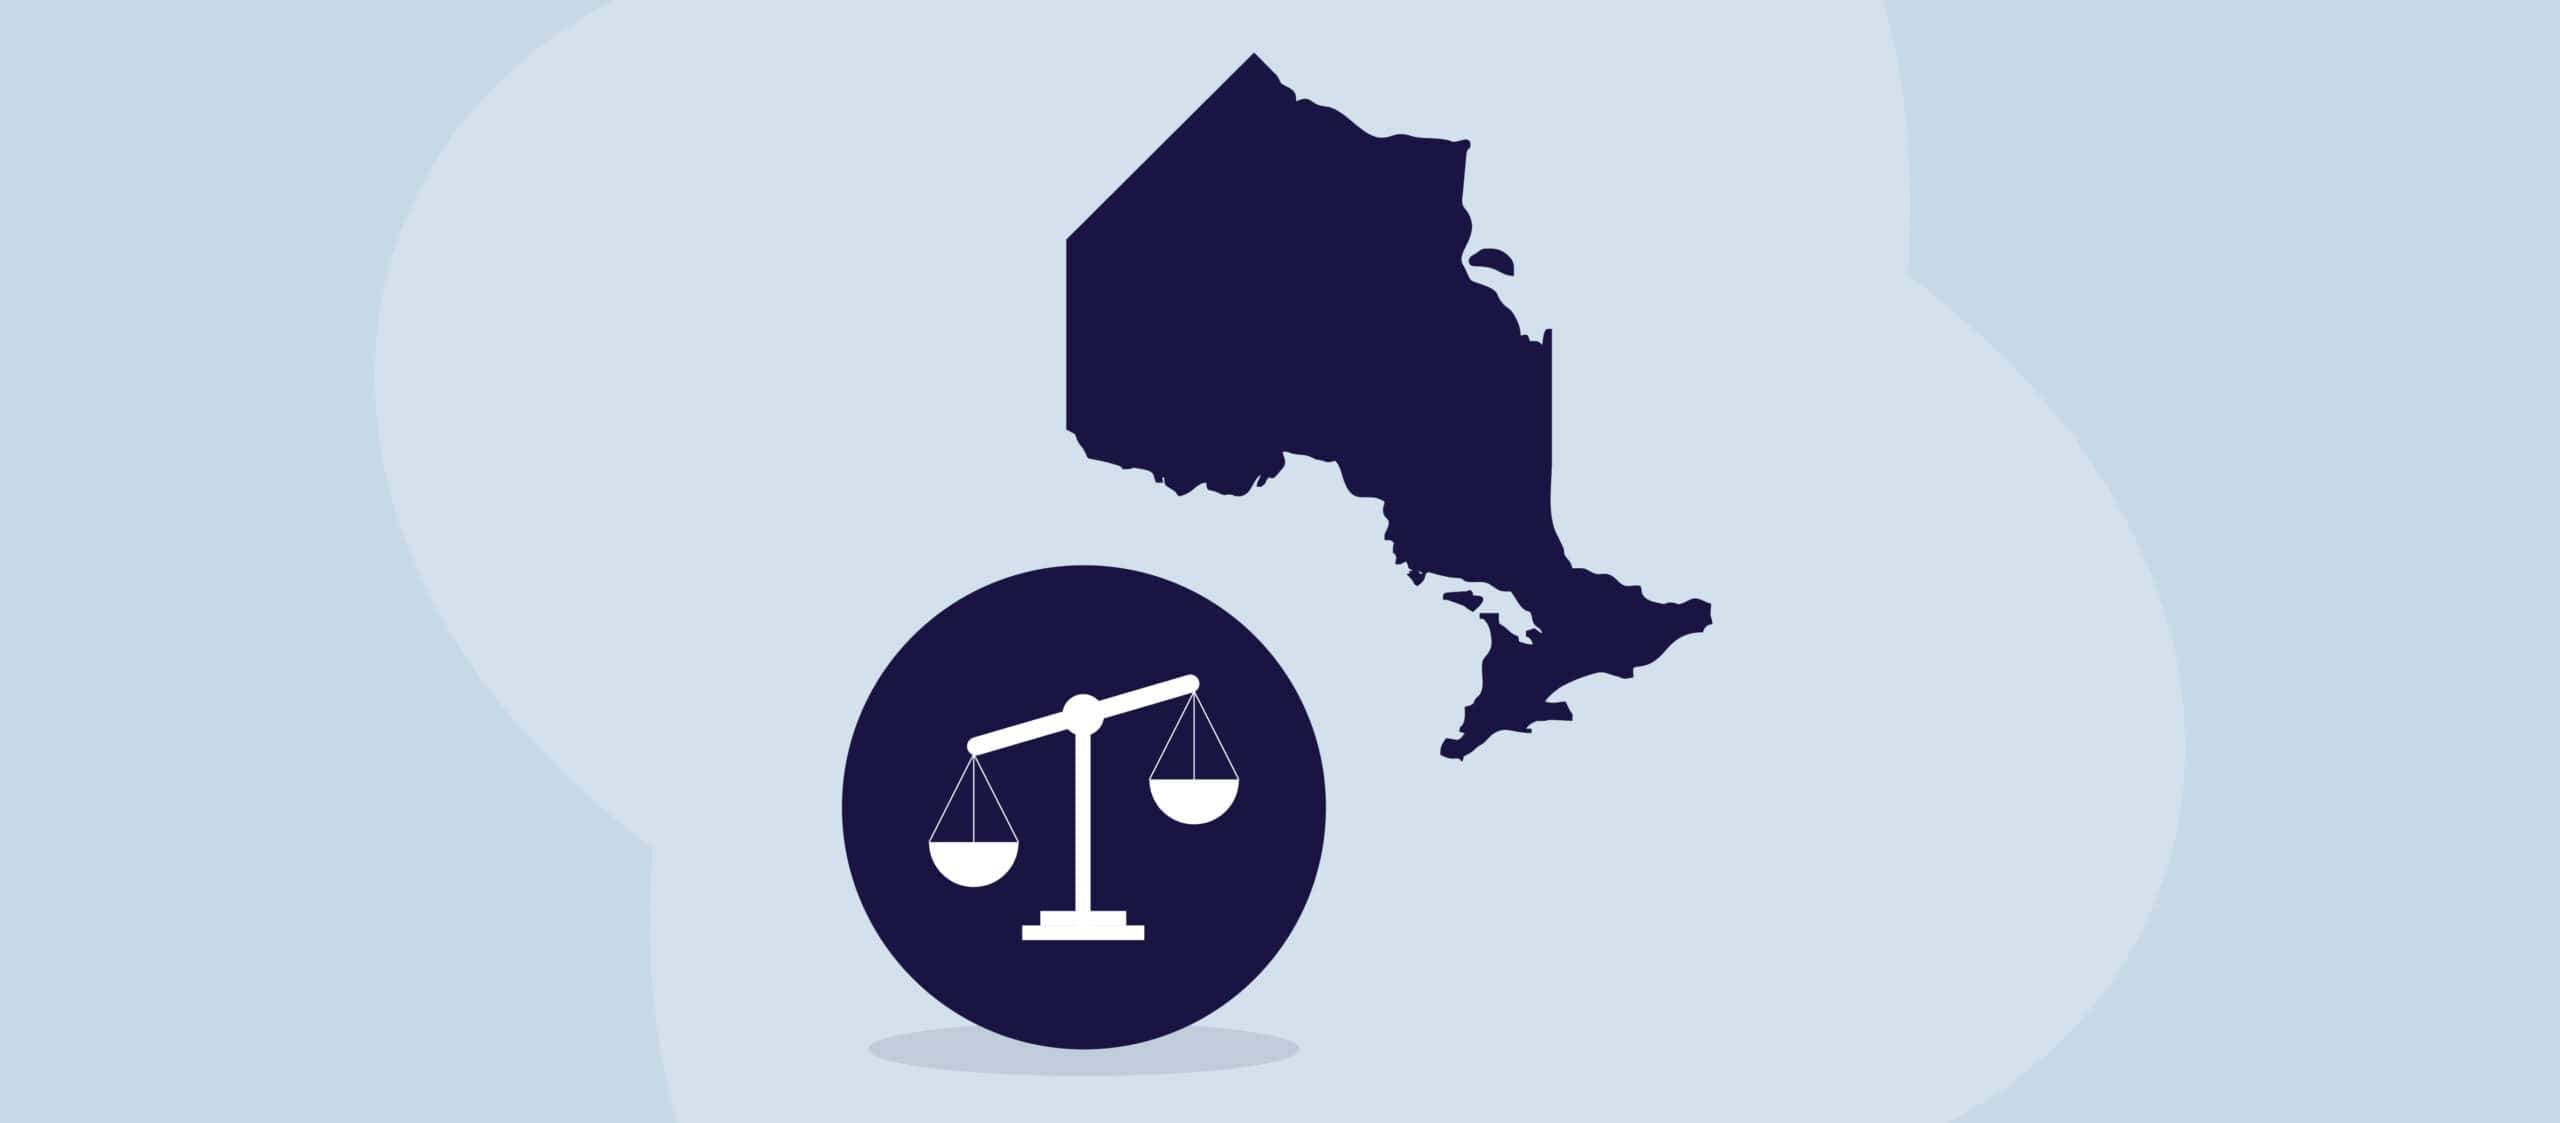 An illustration of the province of Ontario next to legal scales.